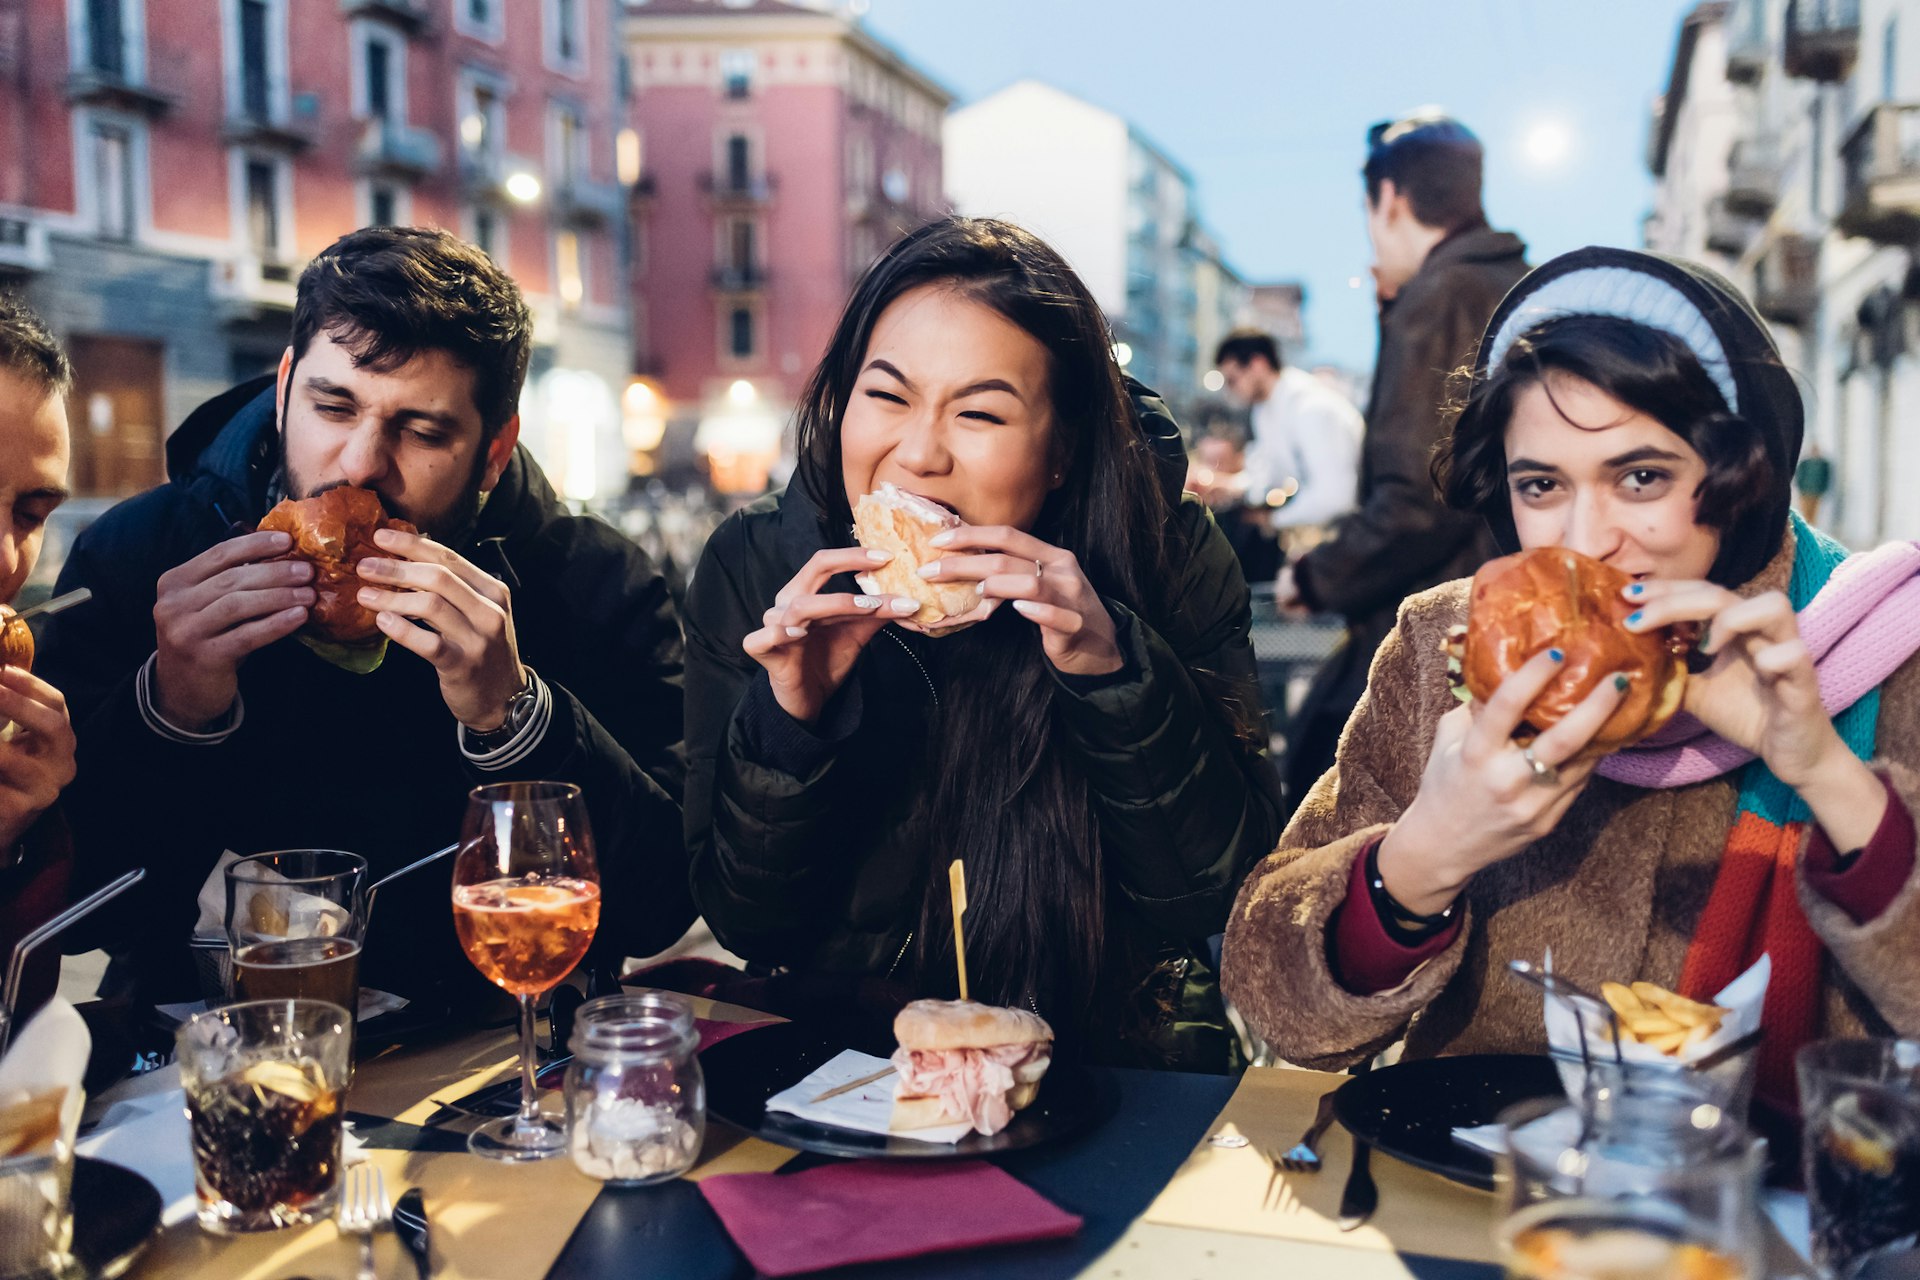 Friends enjoying burgers and drinks at an outdoor cafe in Milan